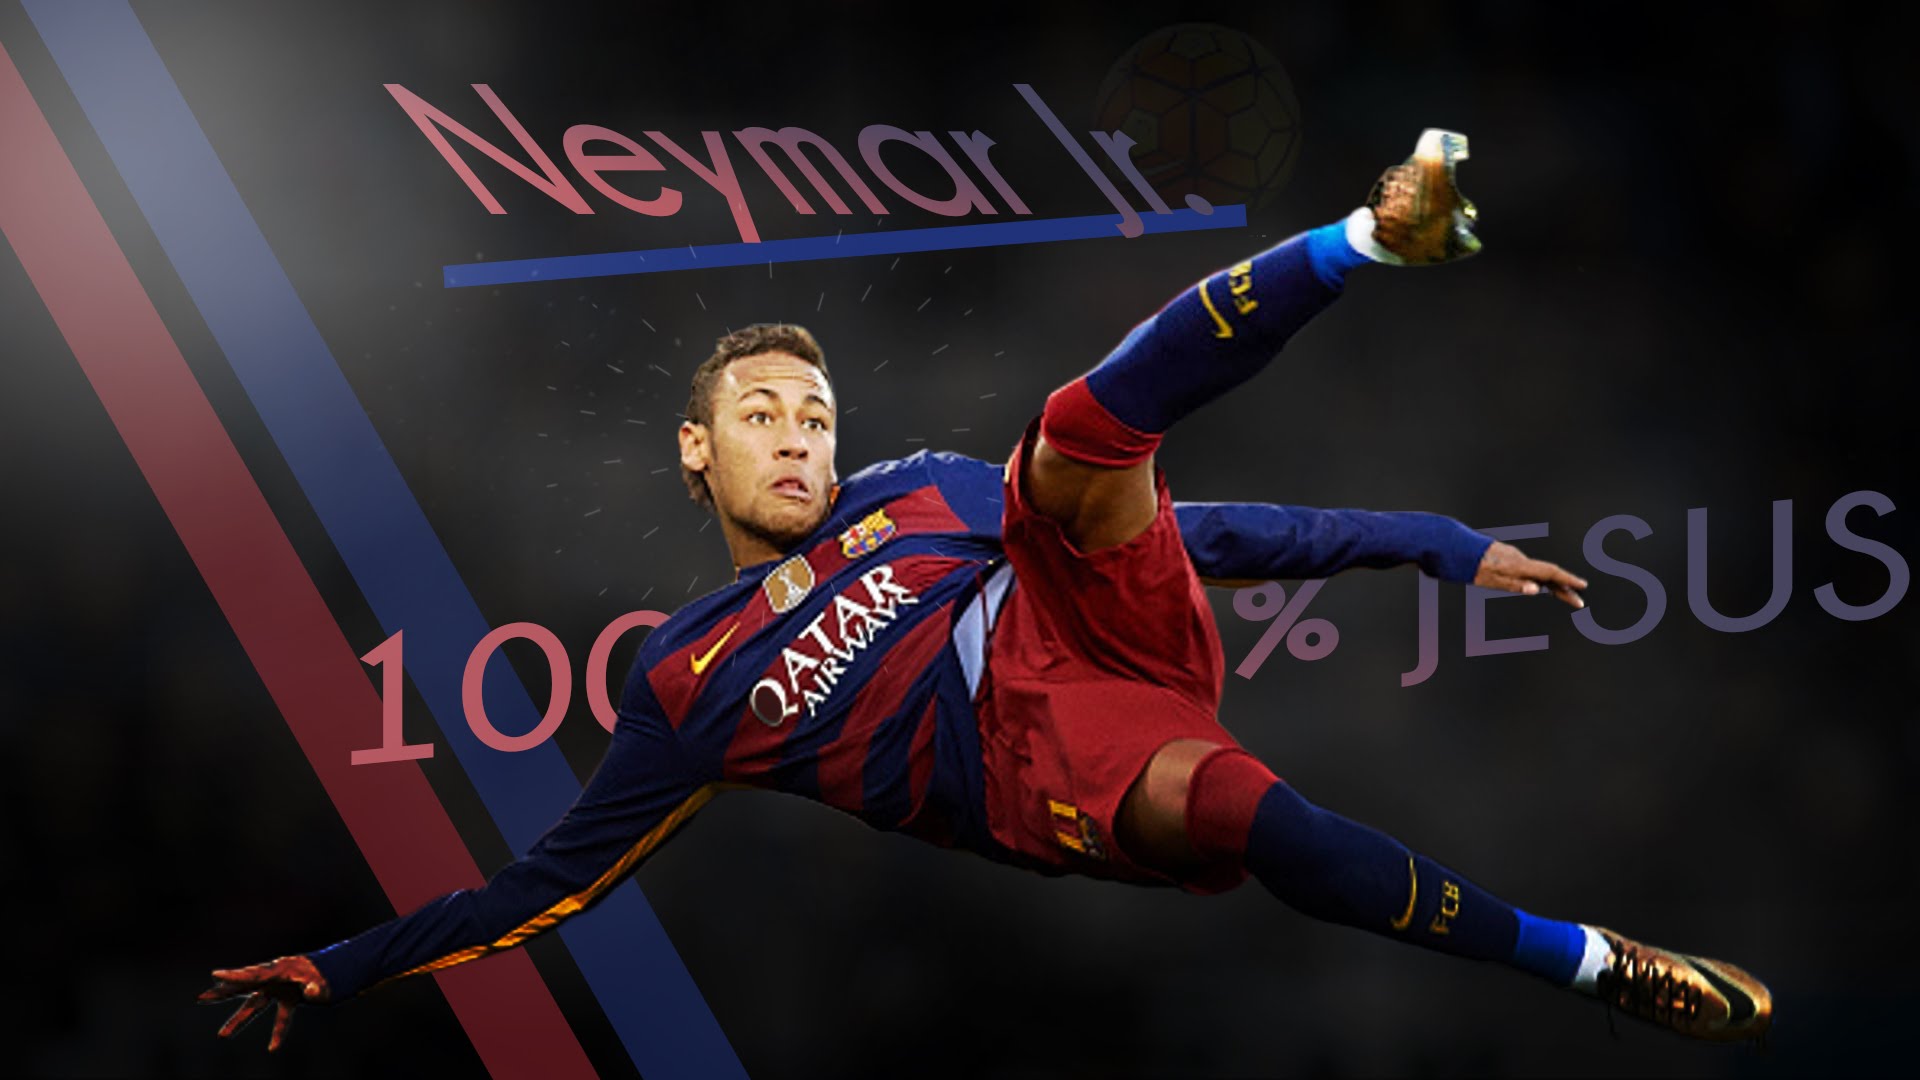 Desktop Neymar Football Soccer Player Hd Free Kick Ball In Air Mobile Bakground Download Pictures